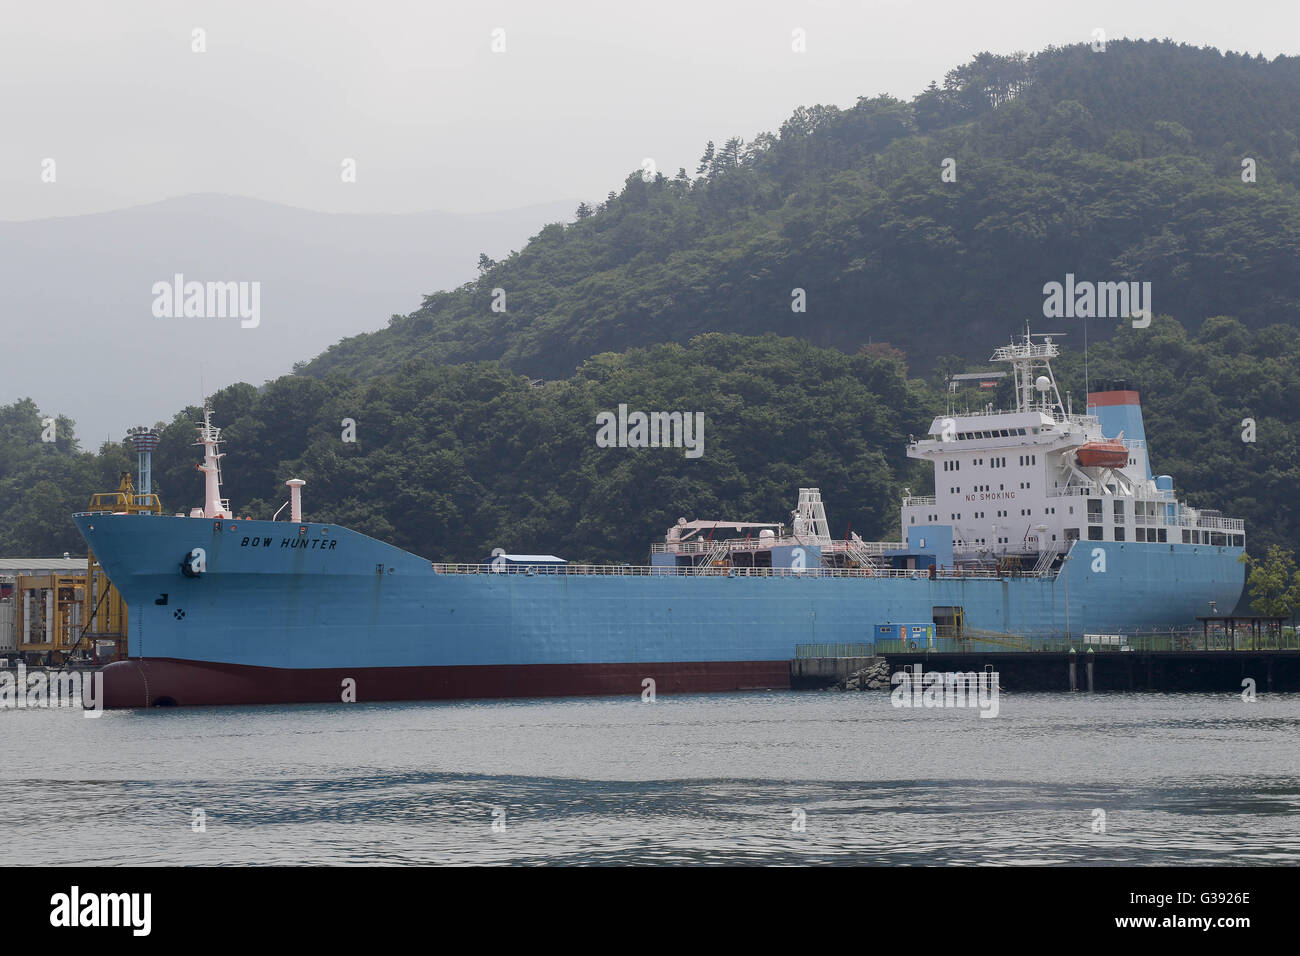 Geoje, Gyeongnam, South Korea. 7th June, 2016. Ships under construction sit moored at the DSME shipyard in Geoje, South Korea. Shipbuilding has been central to South Korea's economy since the 1970s. Ships accounted for 8.5 percent of the country's total exports through June 20 of October 2015, according to the trade ministry. After more than a decade of global dominance, South Korea's shipbuilders face an unprecedented crisis that threatens the very survival of one of the flagship industries of Asia's fourth largest economy. Major South Korean shipbuilders plan to restructure their operations Stock Photo